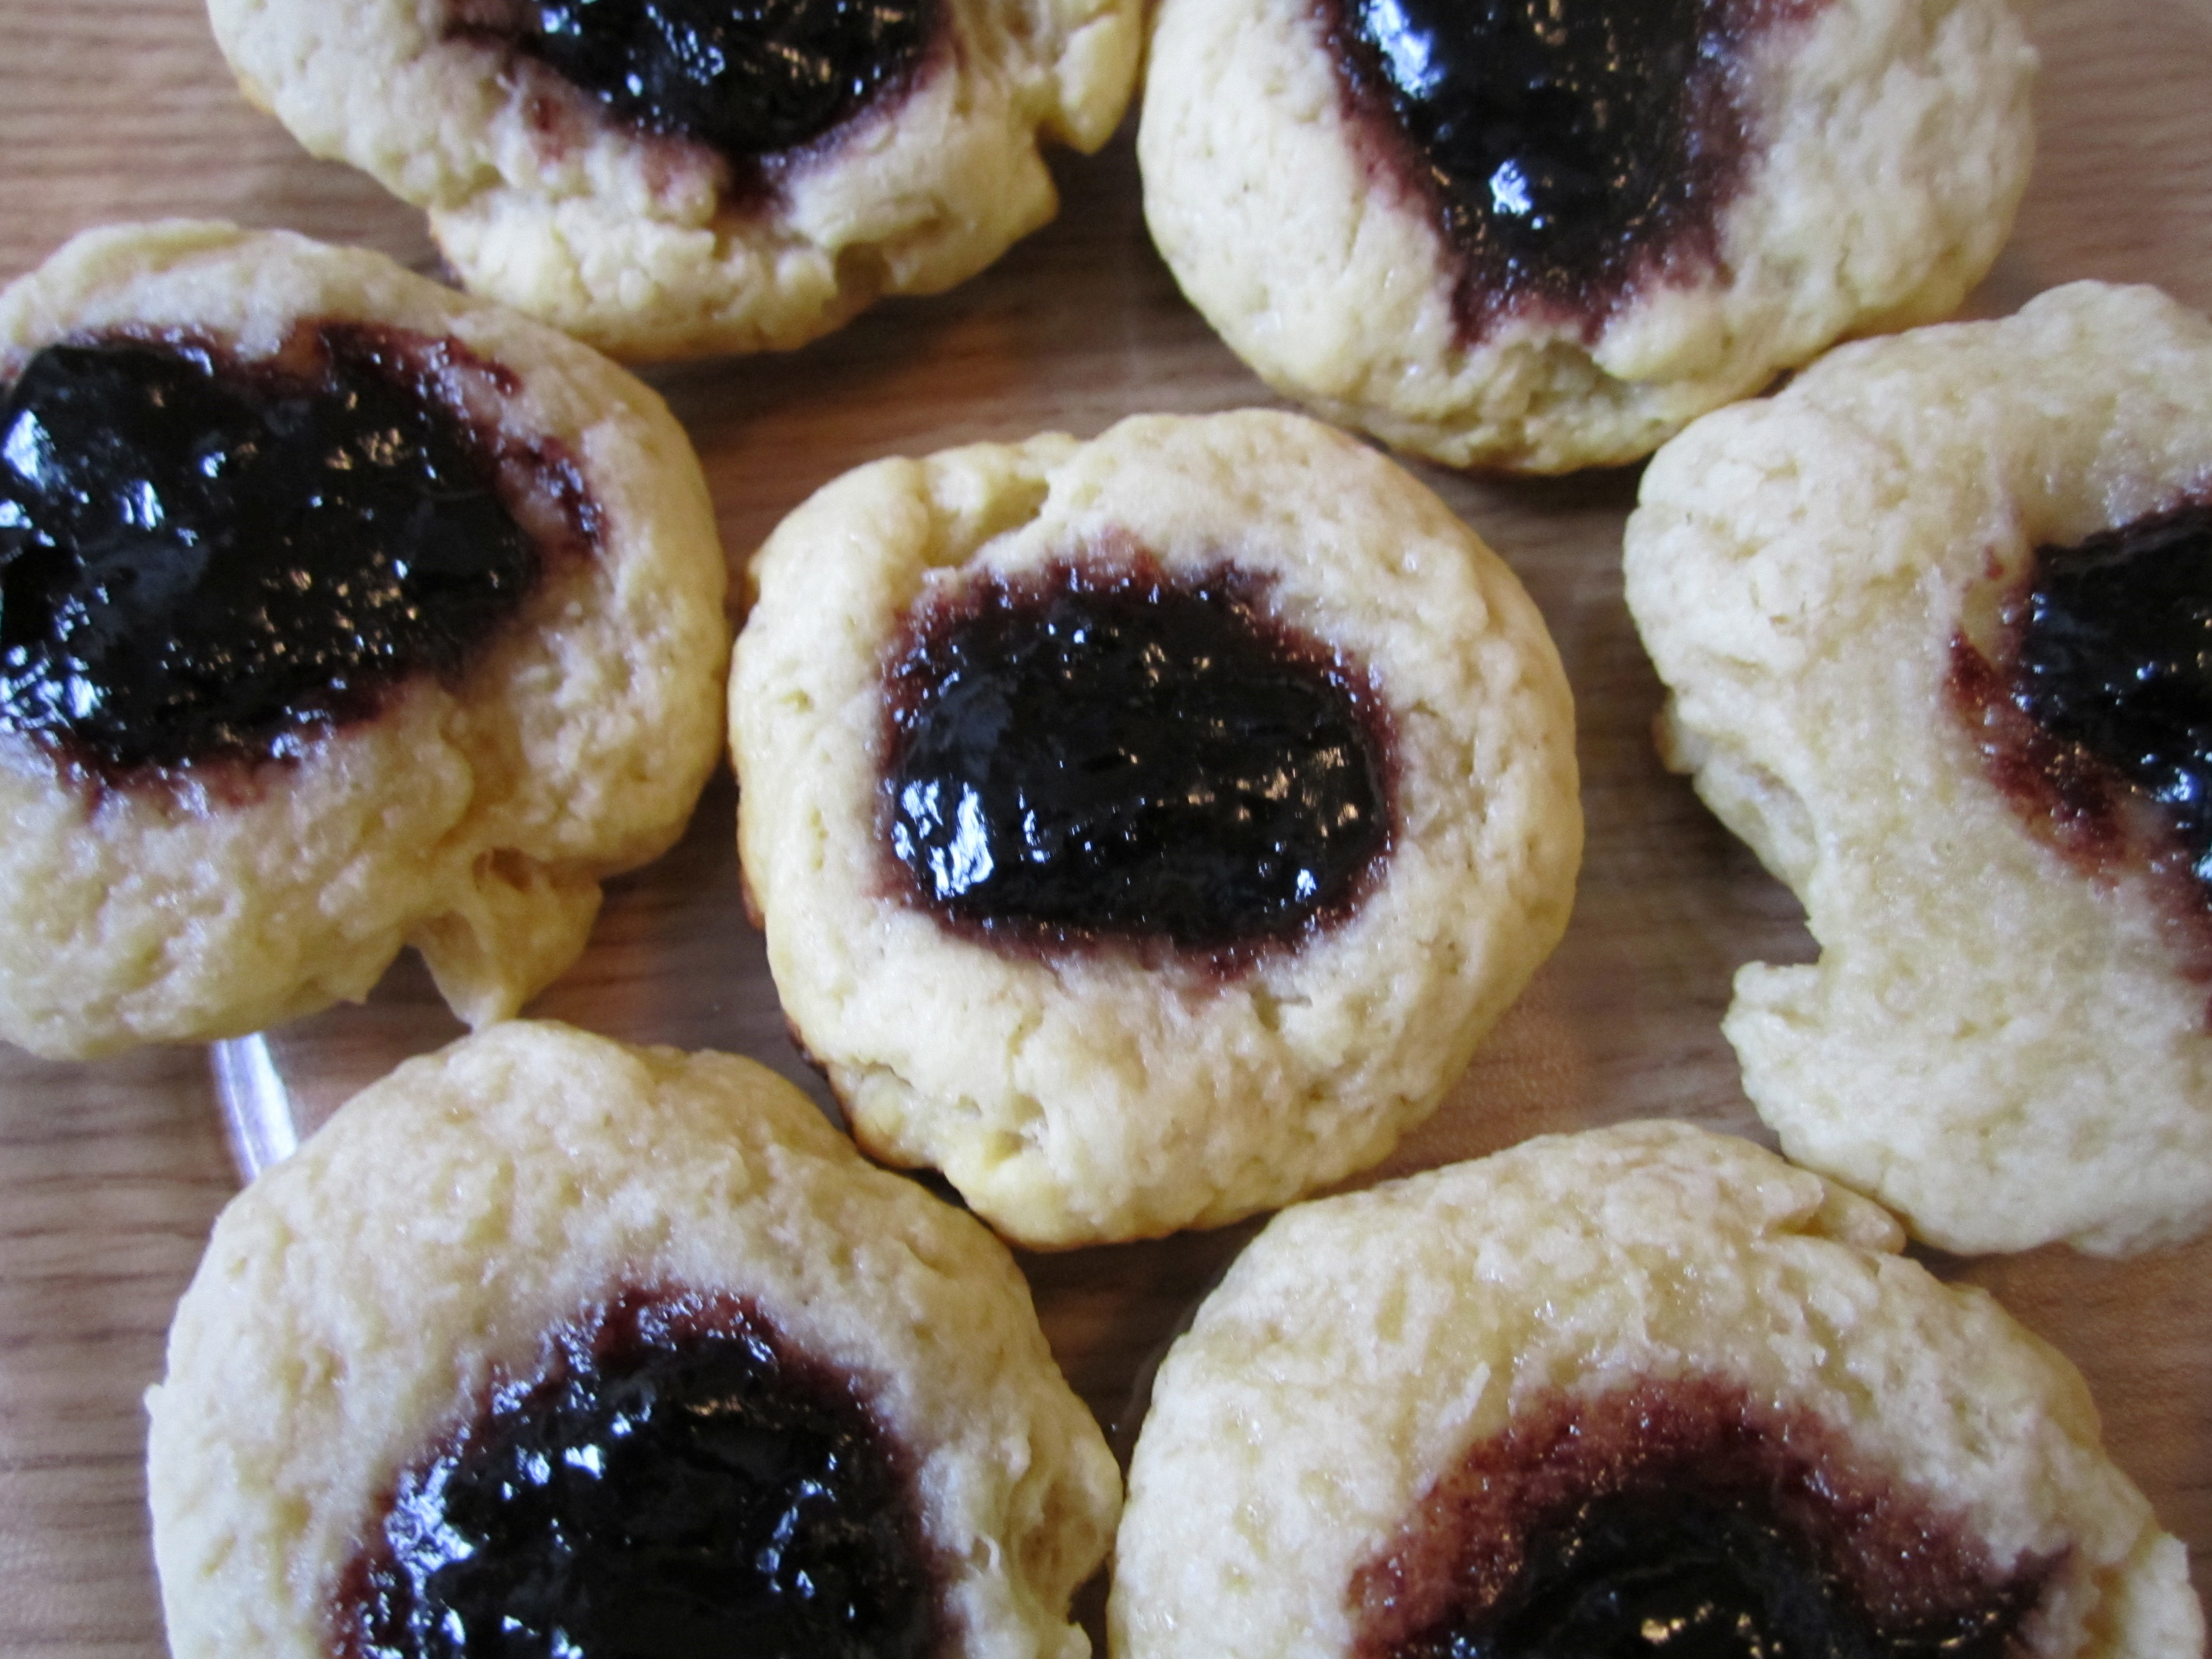 500 Abarth Austrian Jelly Cookies Austrian Jam Cookies Recipe Allrecipes Com Not Only Do These Cookies Look Colorful And Scrumptious But They Taste Completely Irresistible